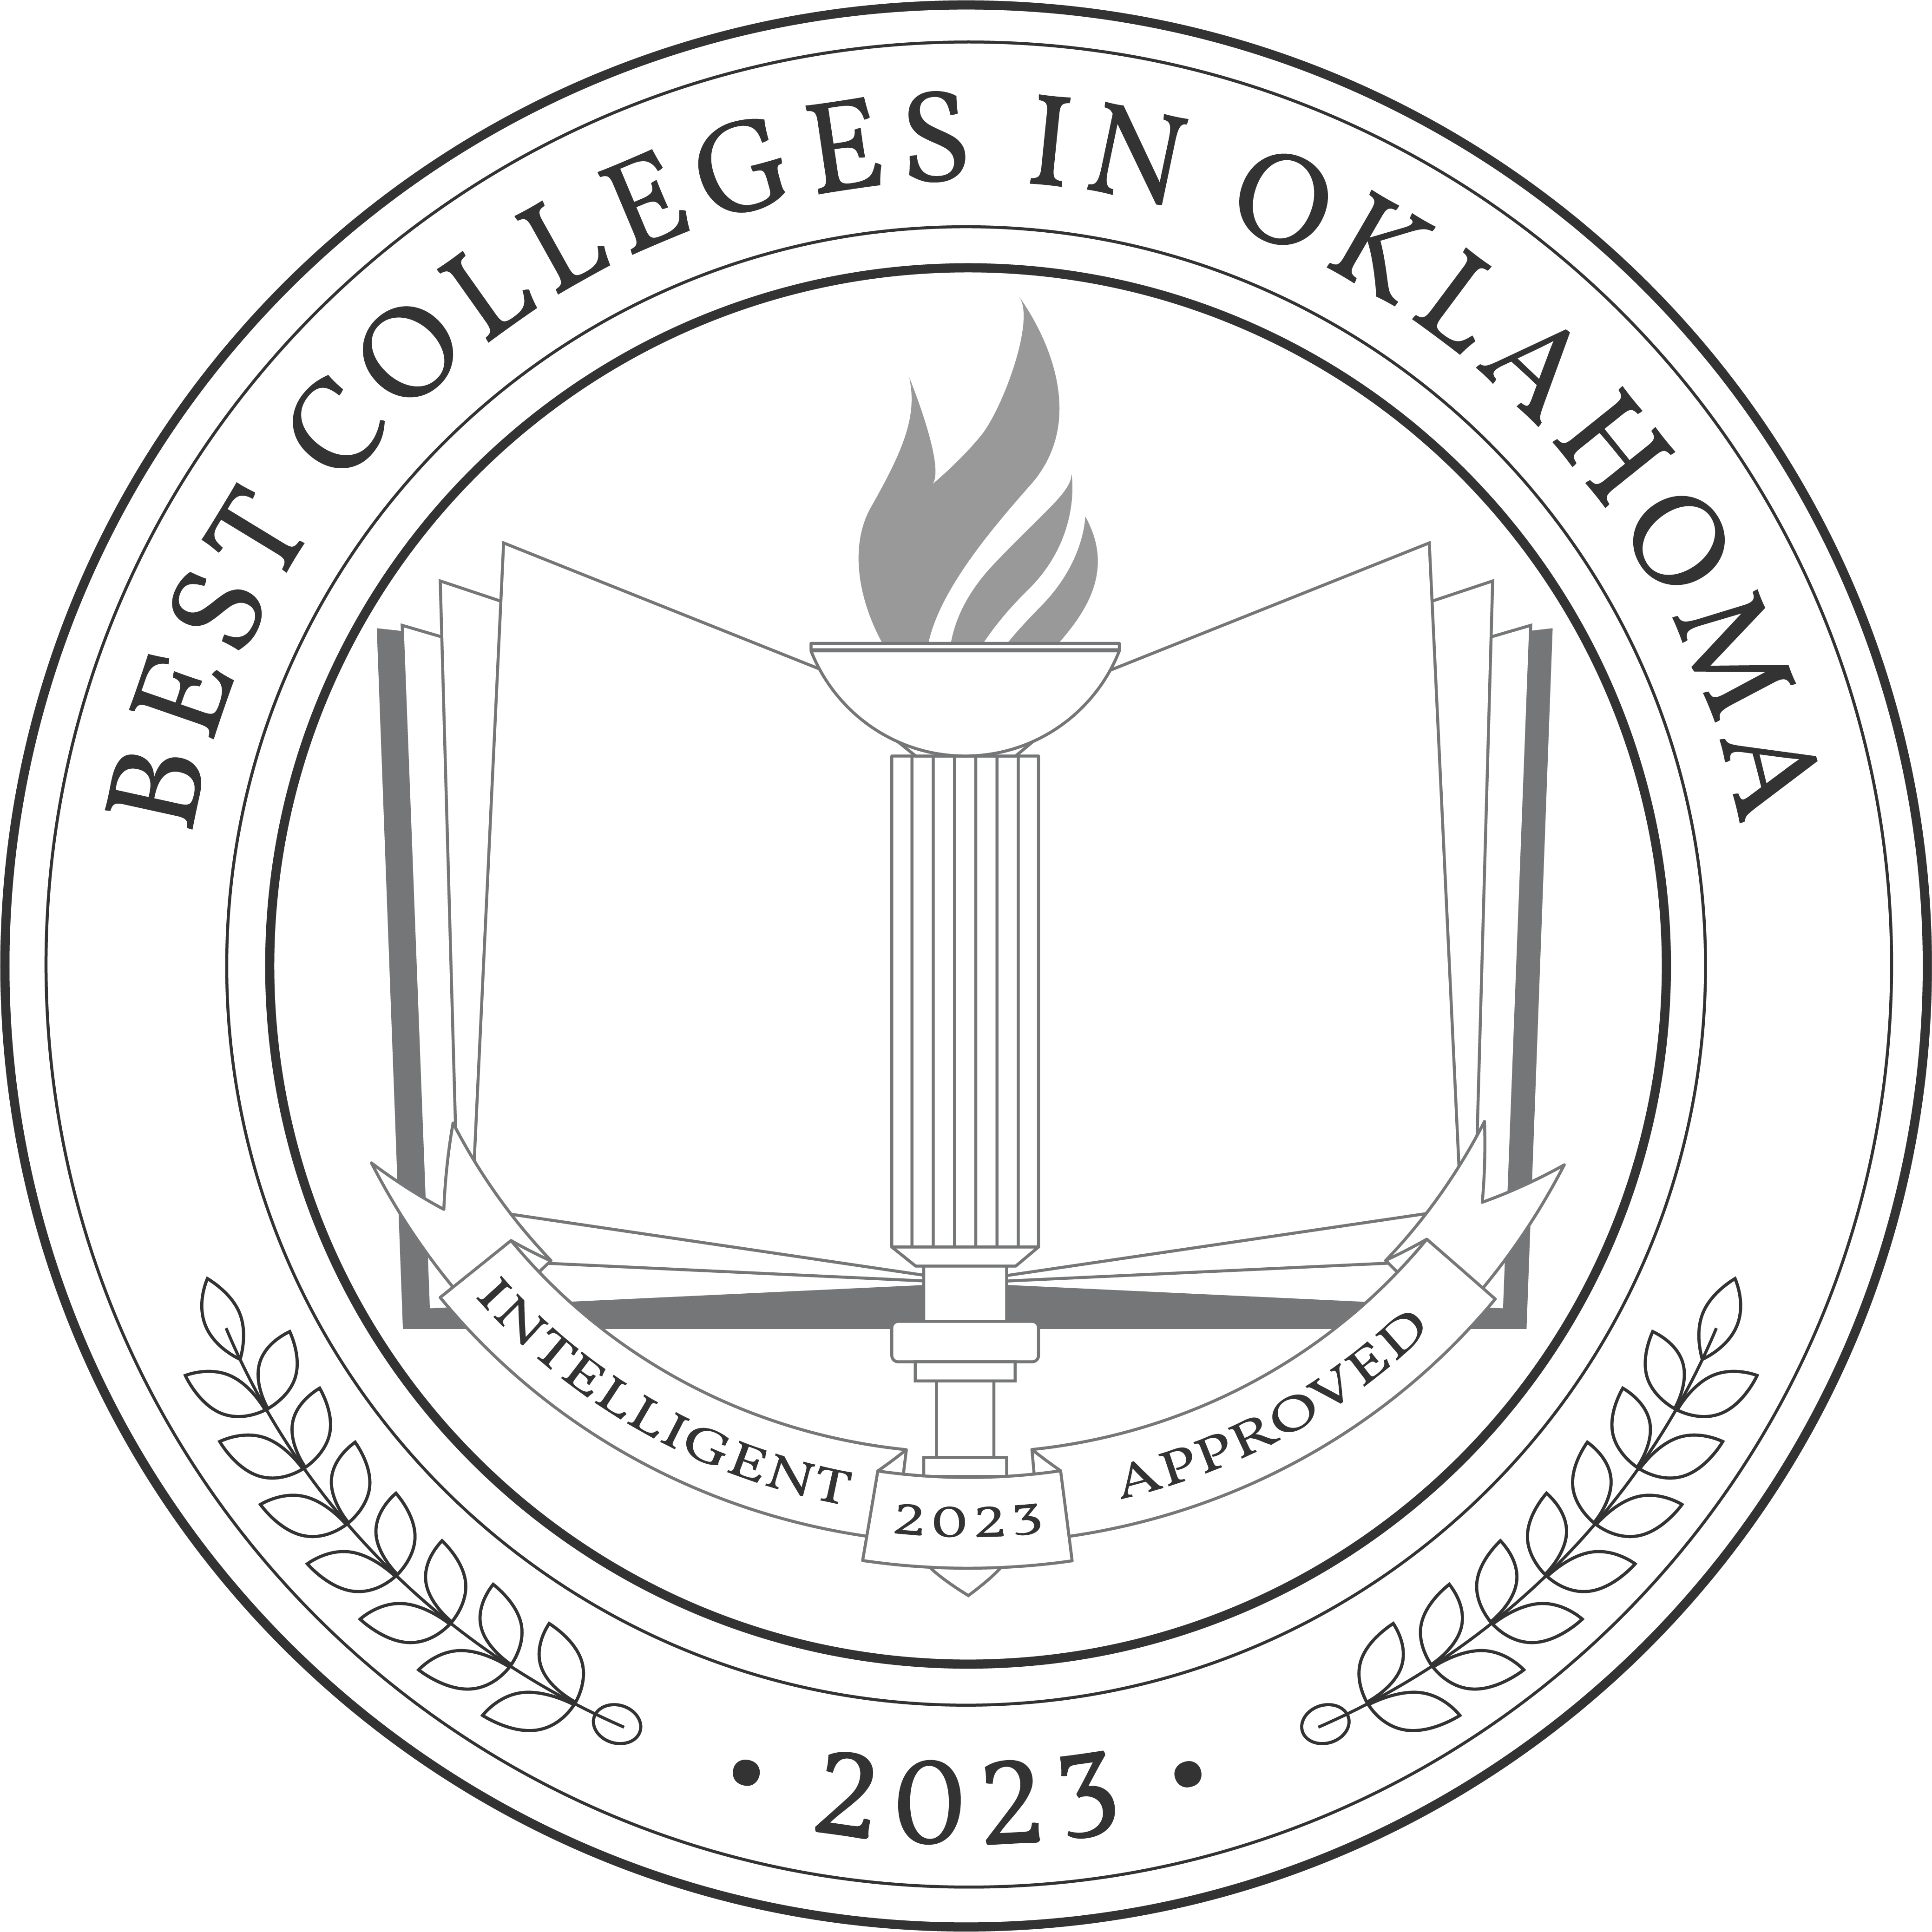 Best Colleges in Oklahoma 2023 Badge